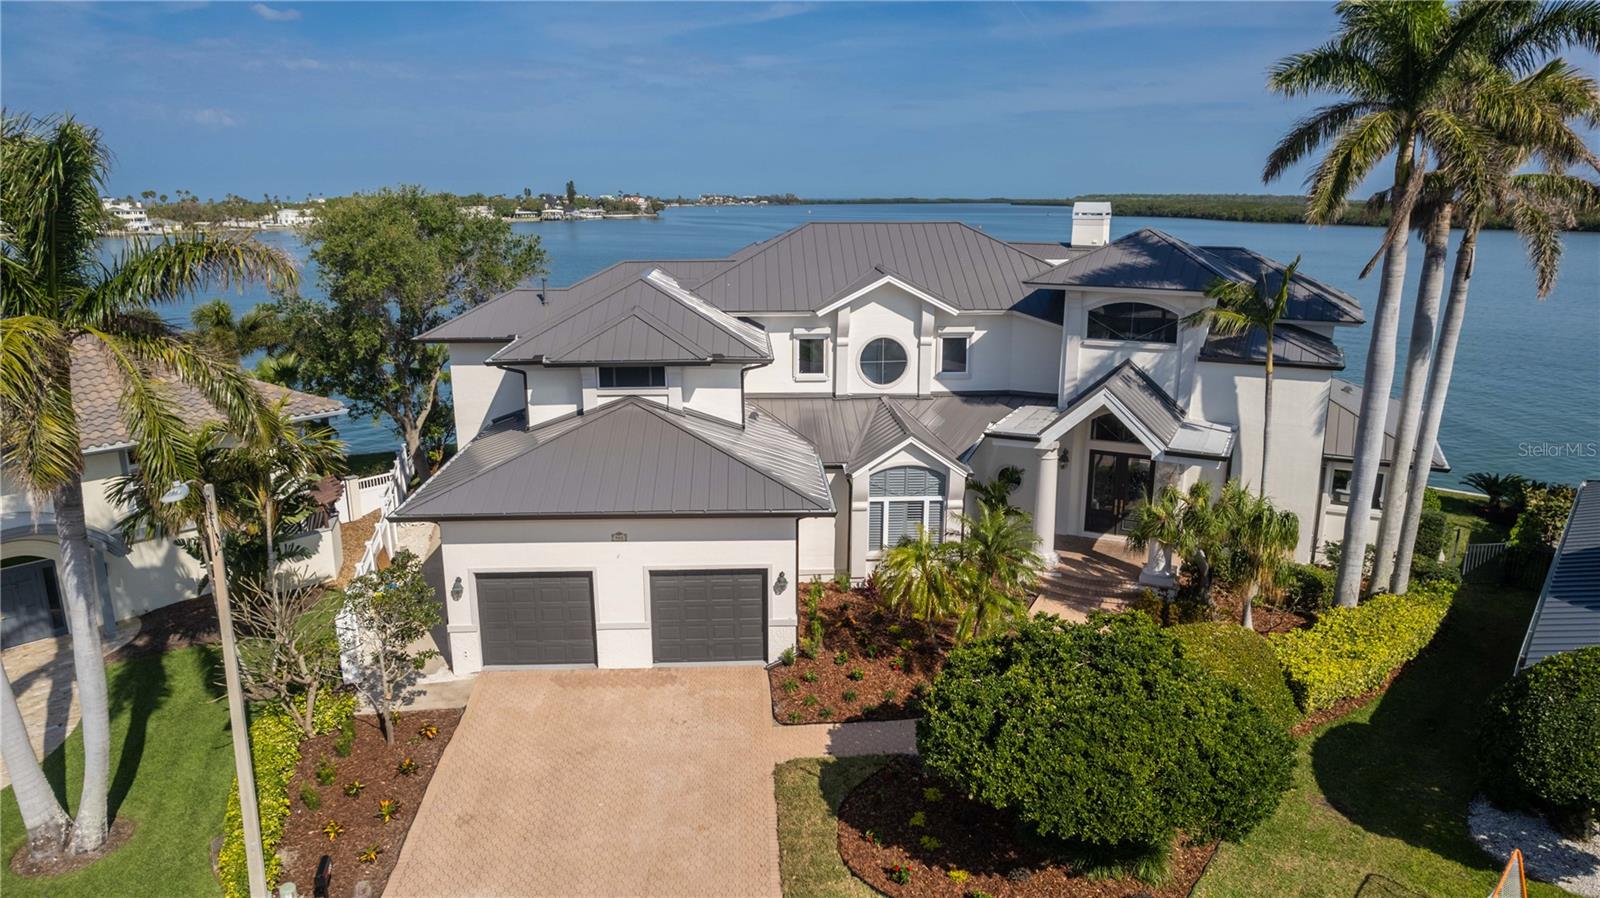 Details for 900 Harbor Island, CLEARWATER, FL 33767